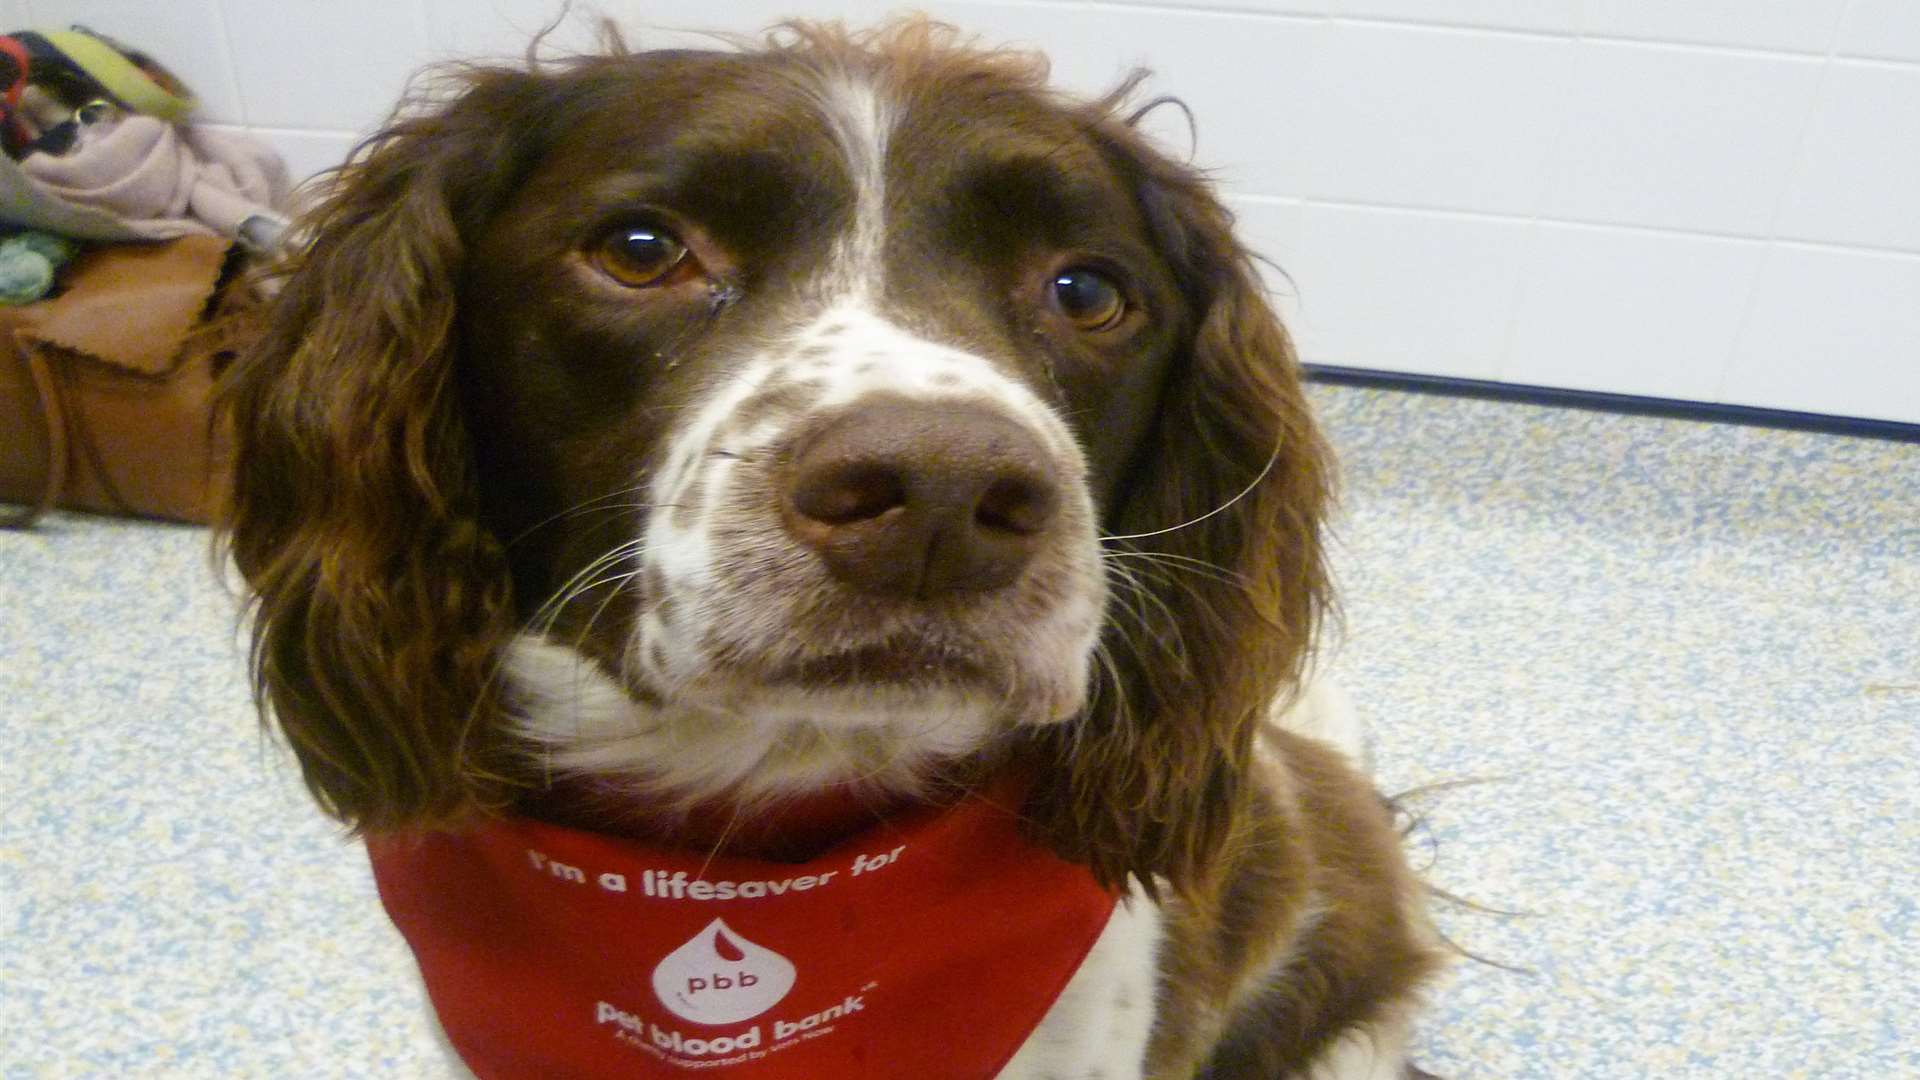 Crosby became the 9000th dog in the country to give lifesaving blood